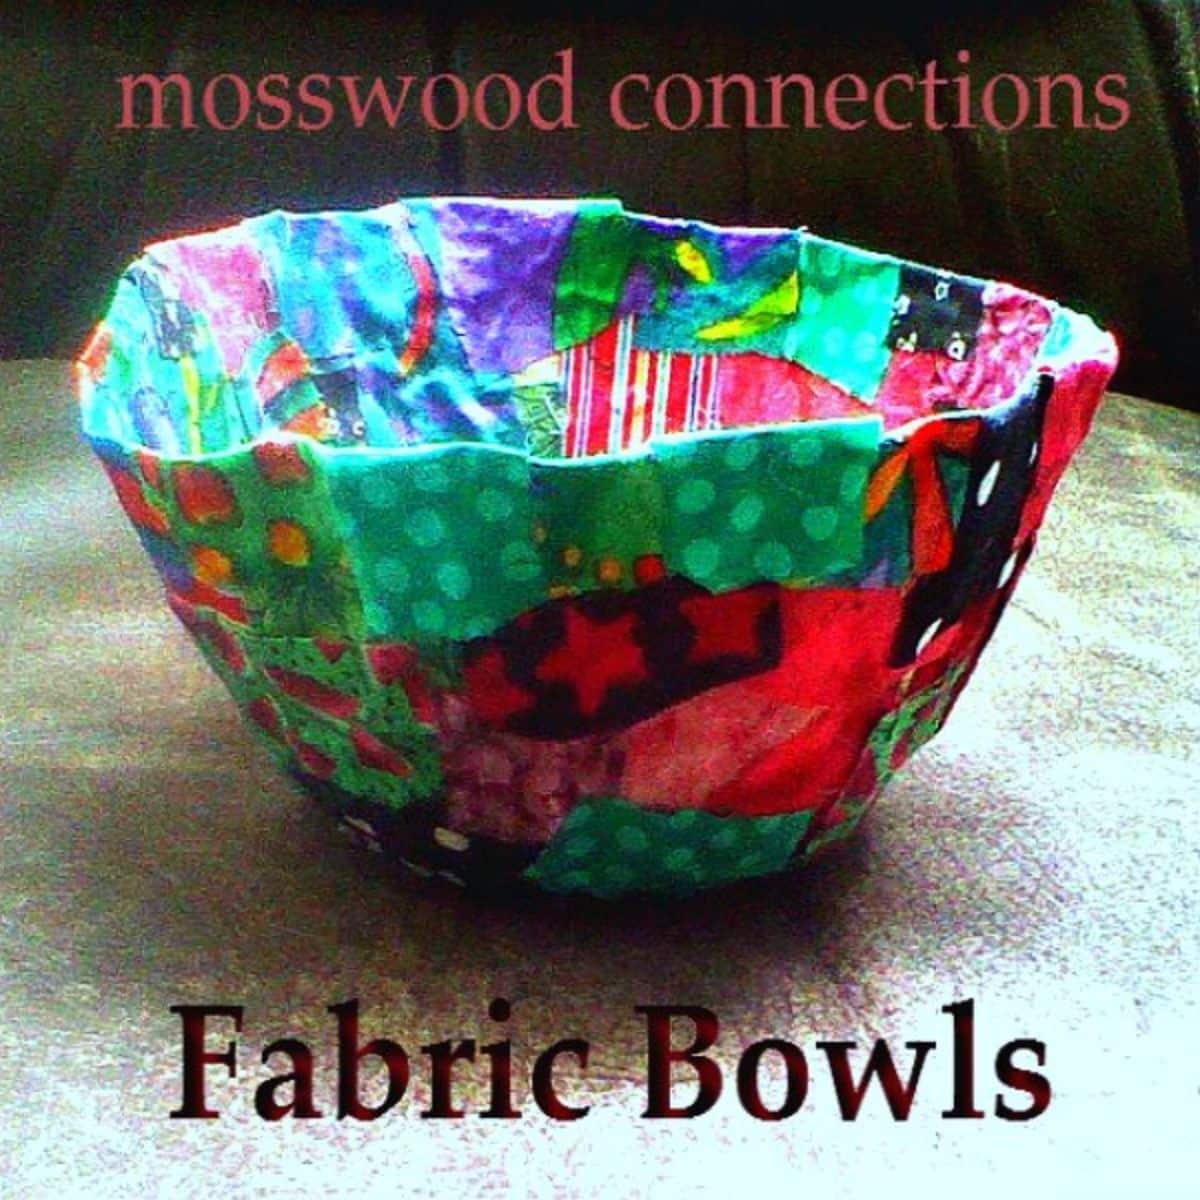 Fabric bowl on a table - art craft for kids